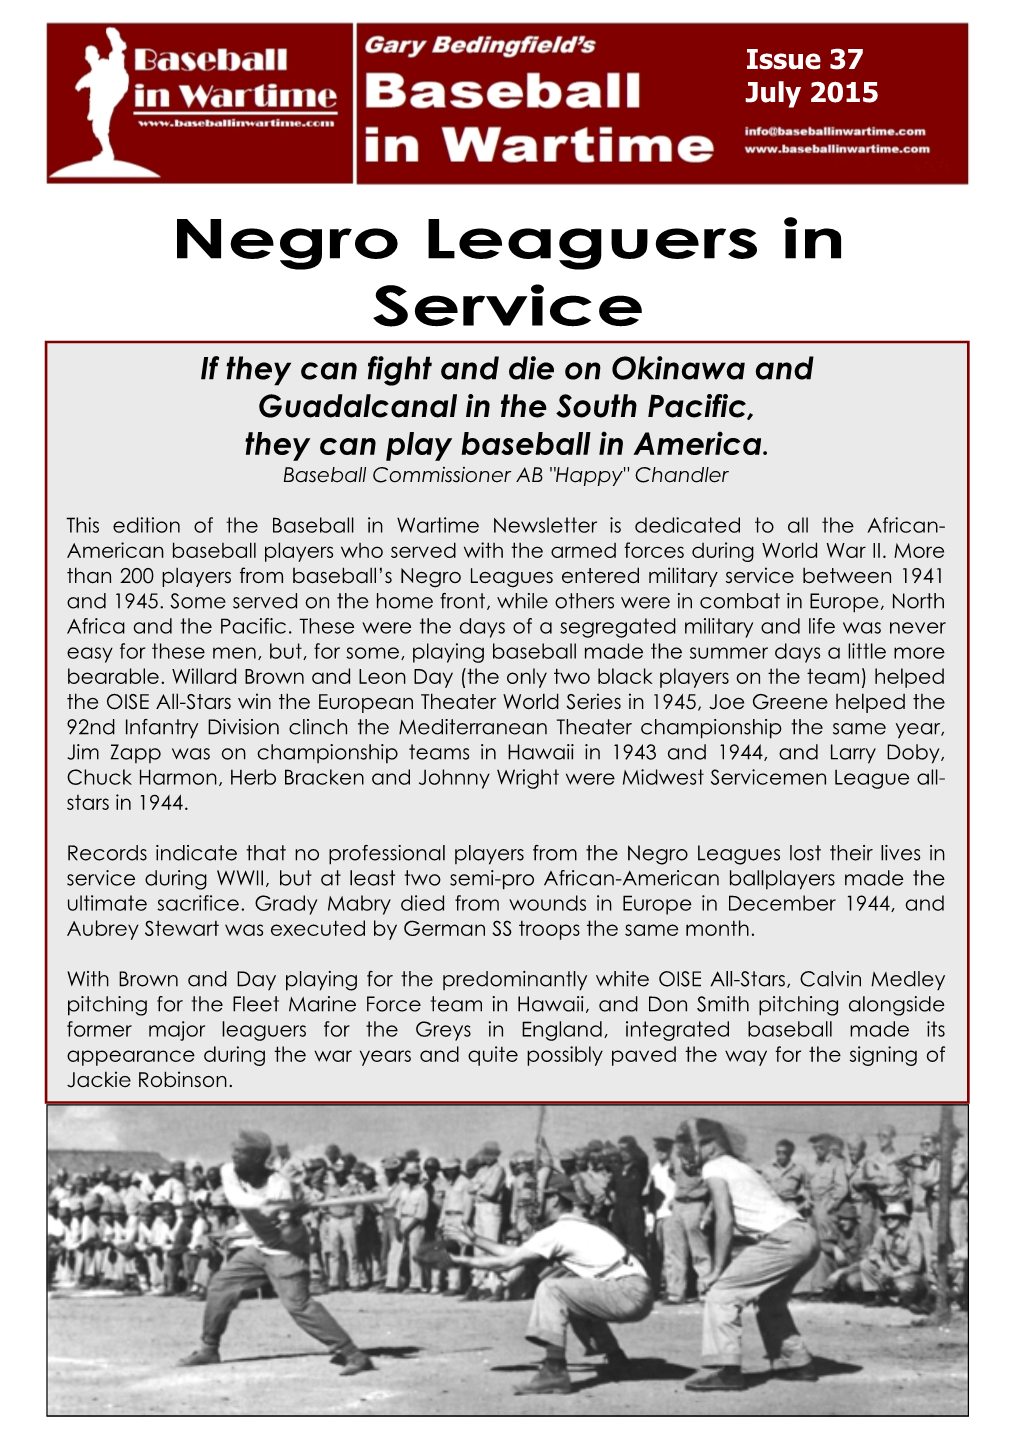 Negro Leaguers in Service If They Can Fight and Die on Okinawa and Guadalcanal in the South Pacific, They Can Play Baseball in America